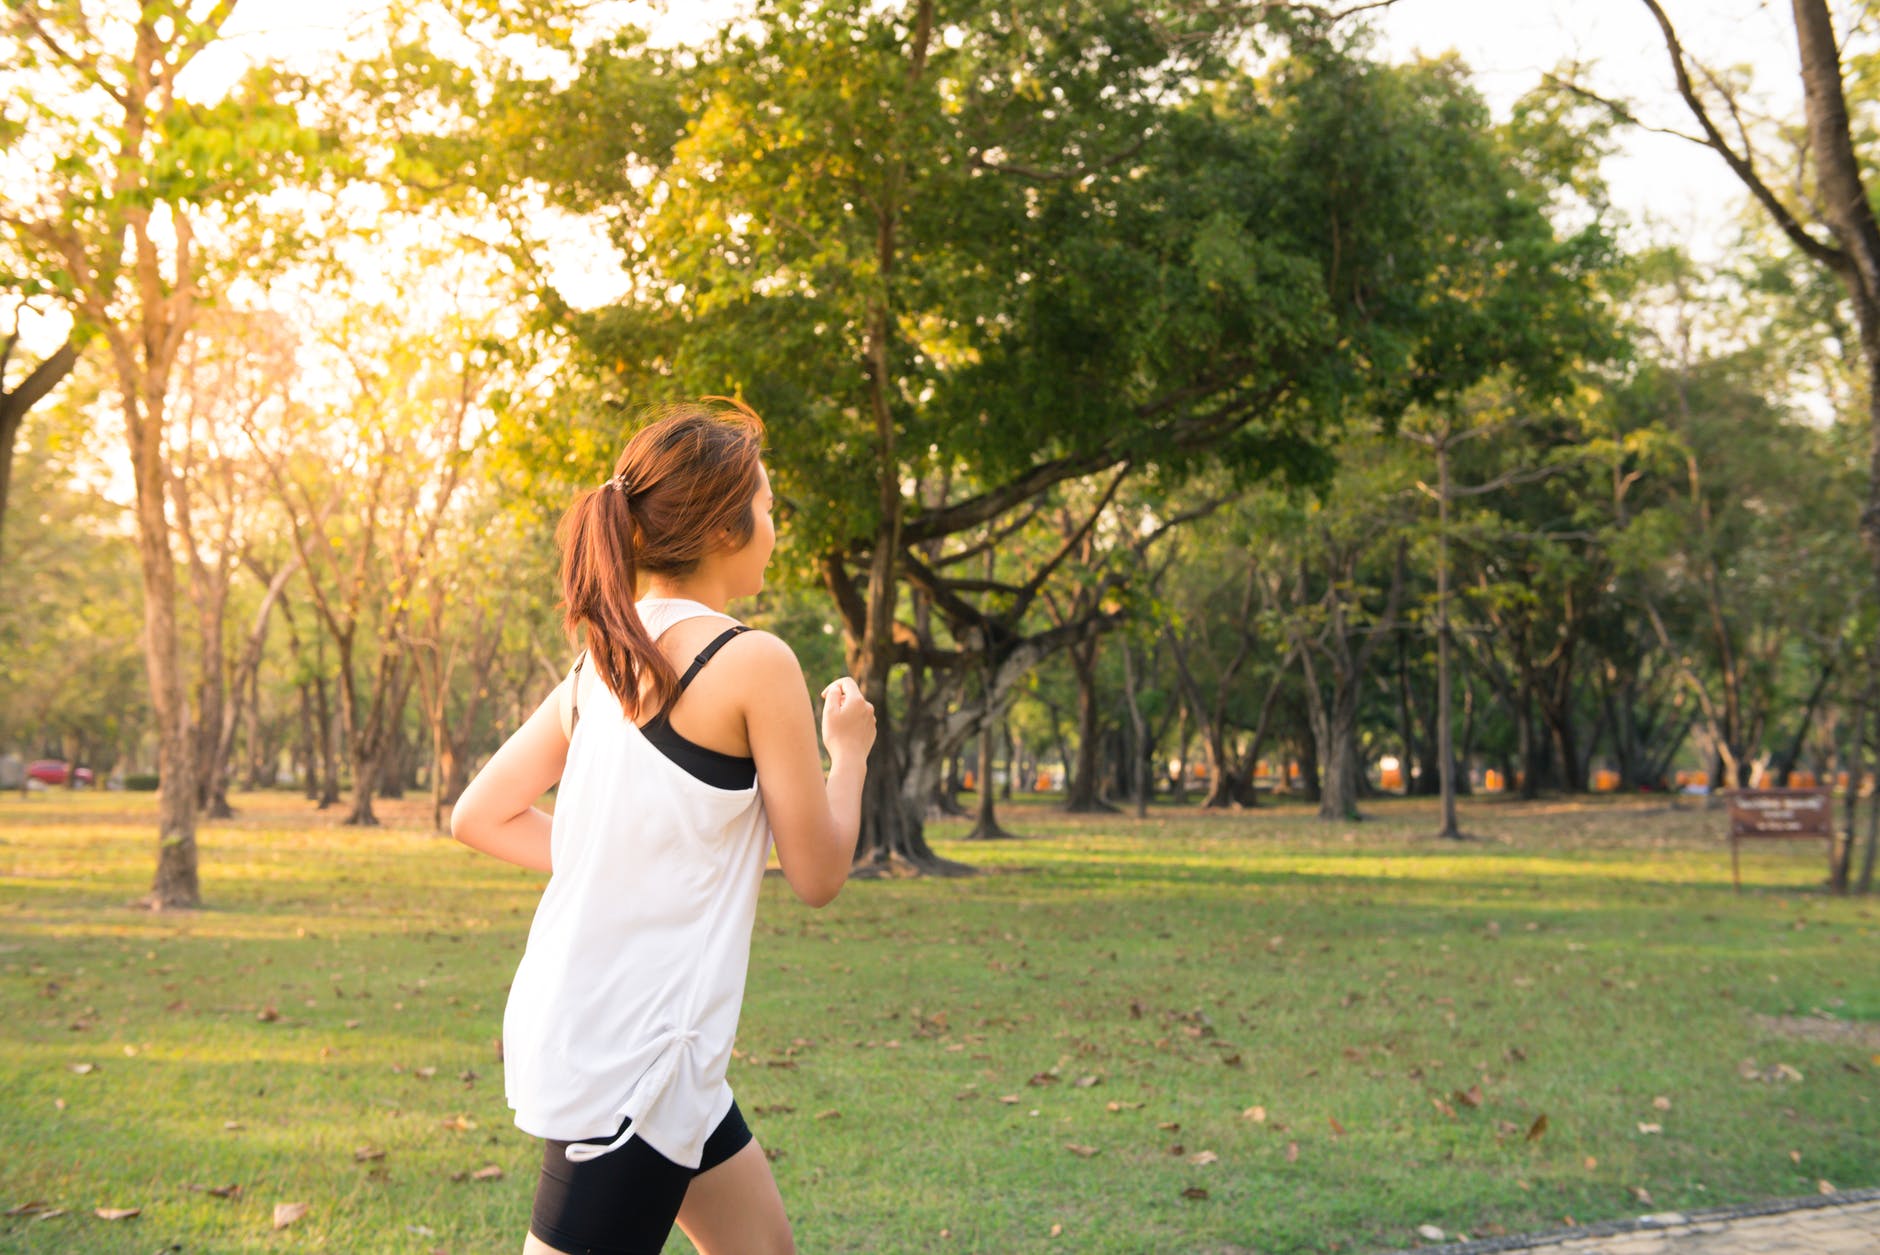 woman about to run during golden hour
healthy while travelling